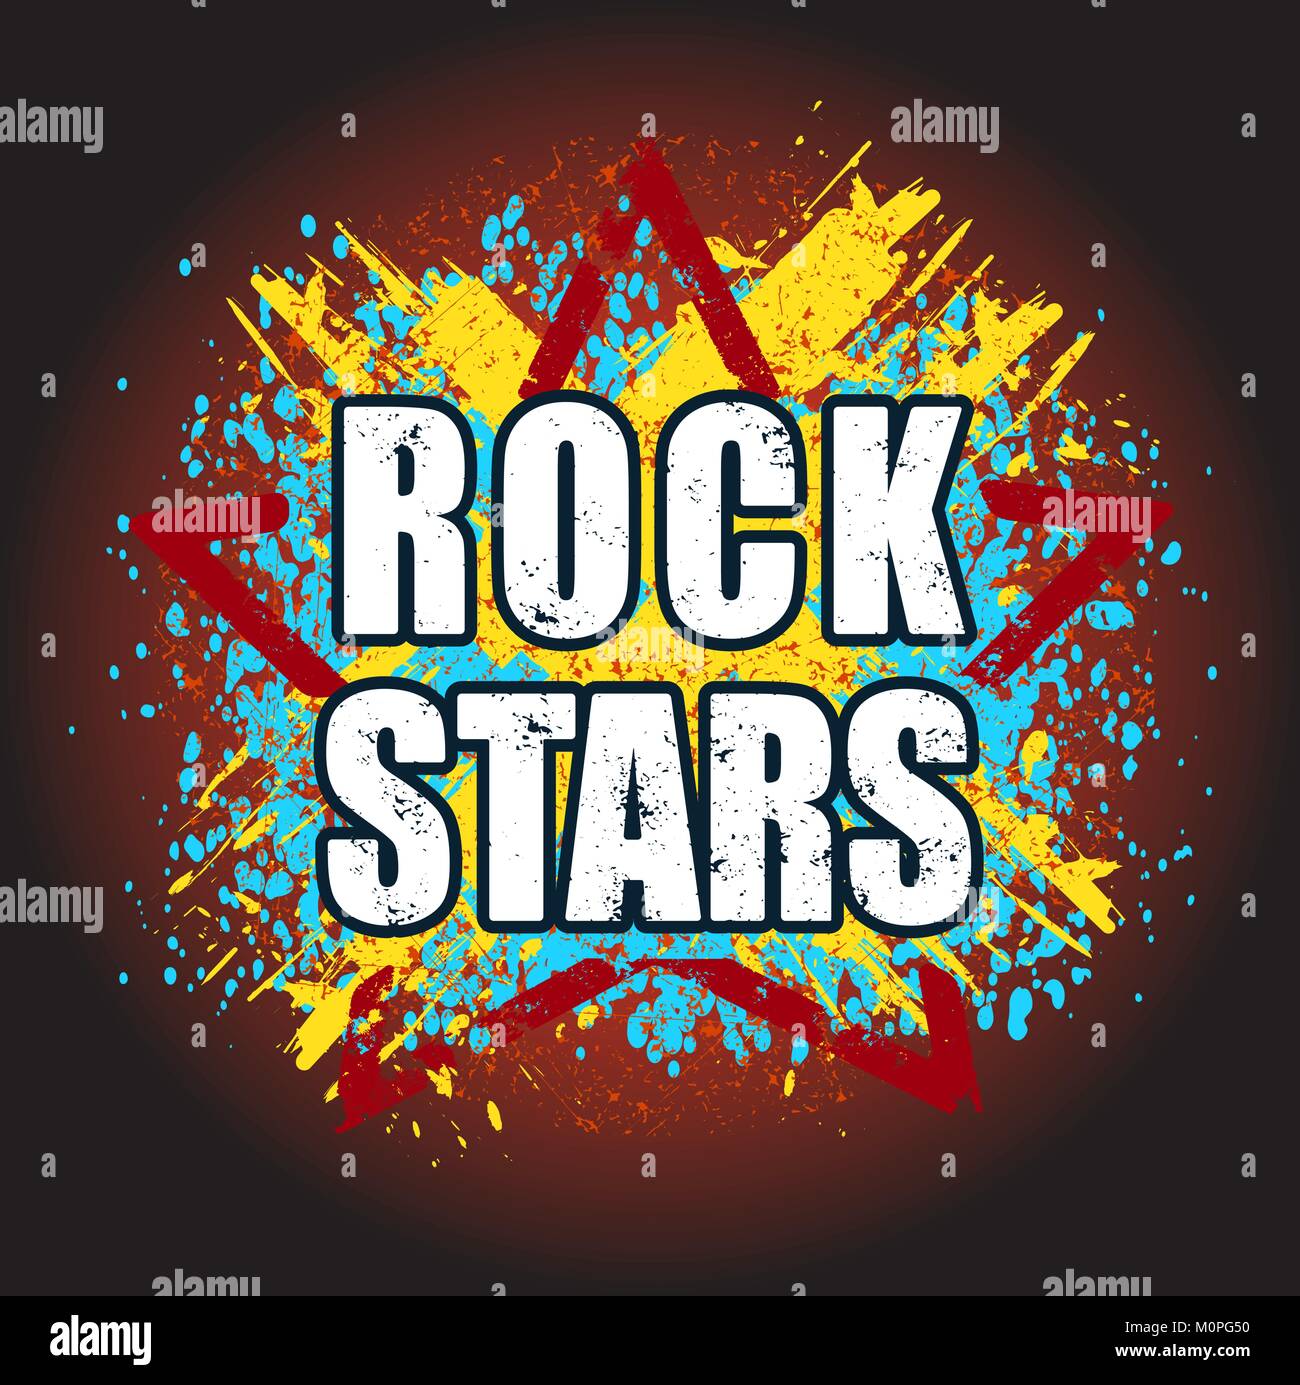 Rock stars very bright grunge design on a dark background for emblem, logo or poster Stock Vector